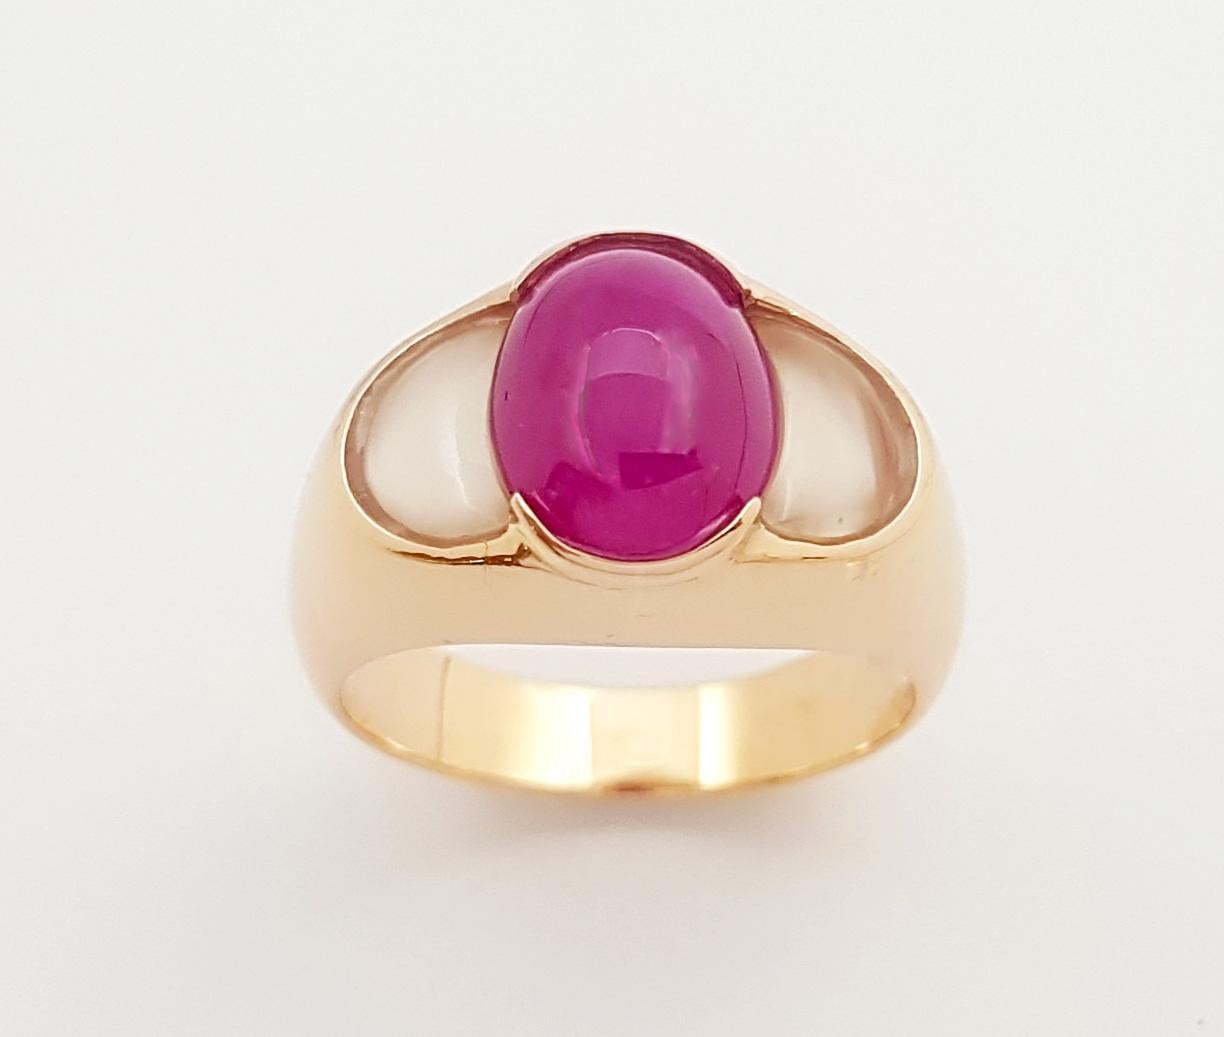 Cabochon Ruby 4.26 carats with Moonstone 1.68 carats Ring set in 18K Rose Gold S For Sale 2